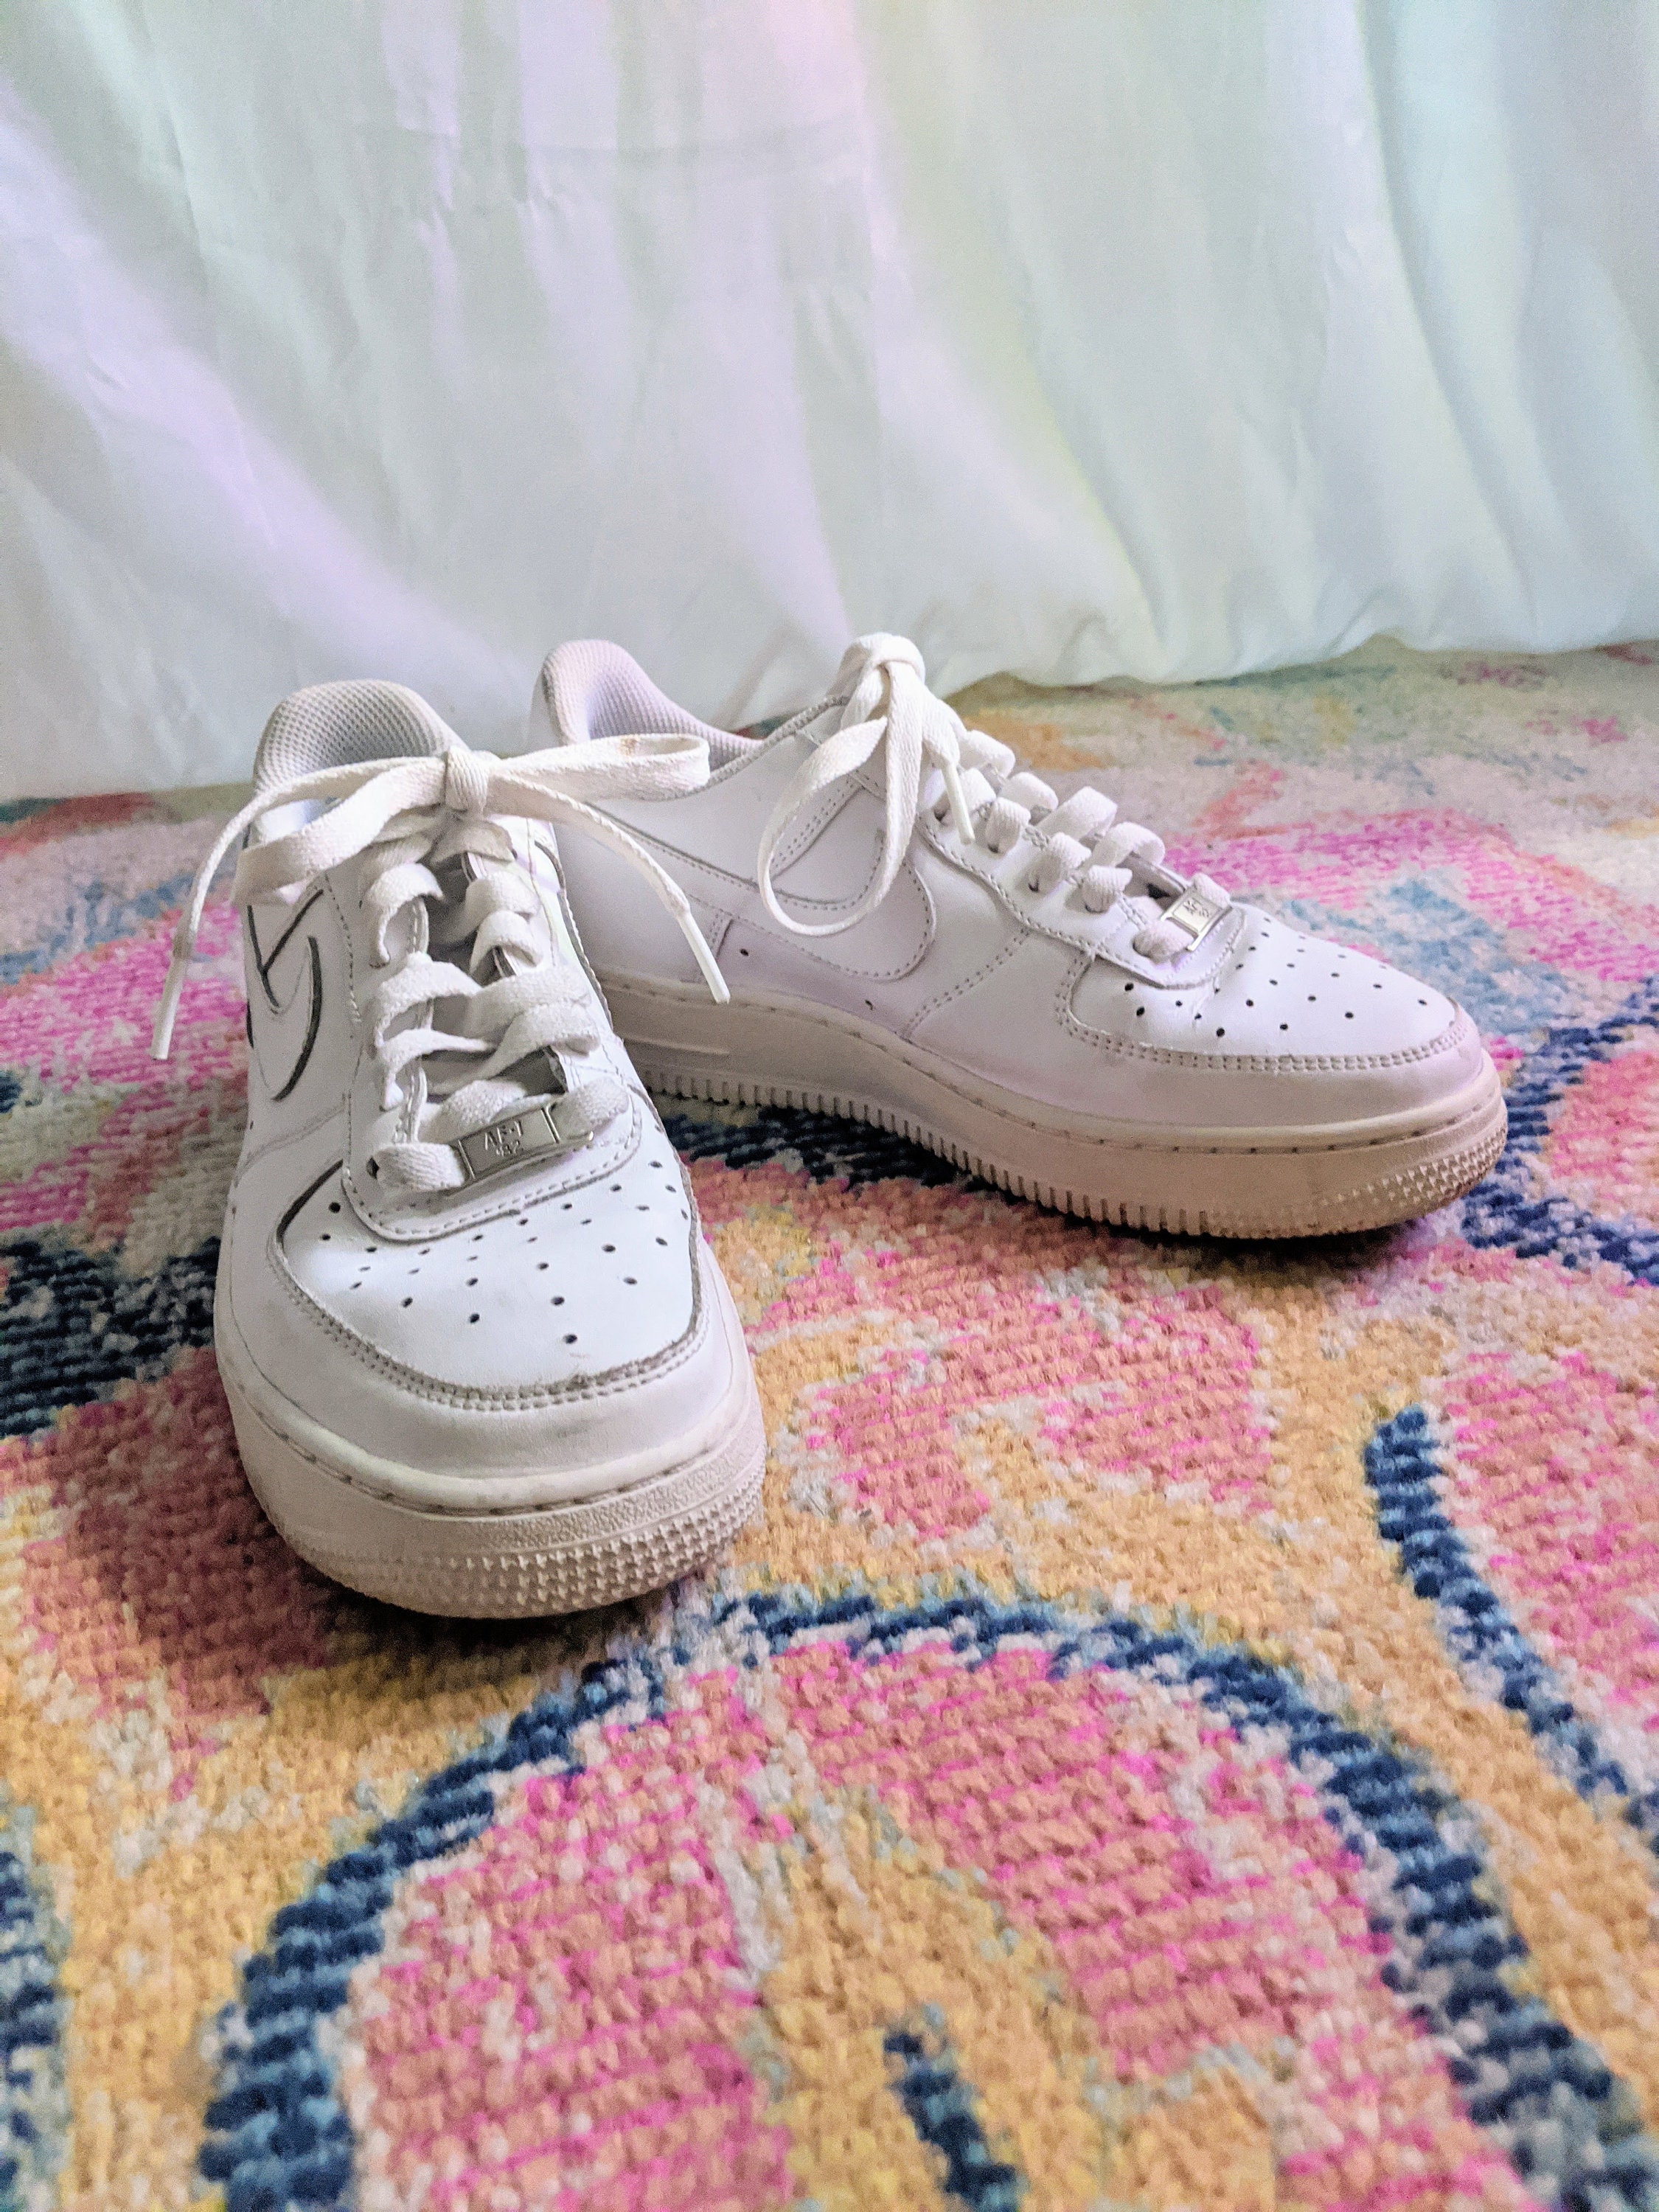 Buy Louis Vuitton LV Trainer Line Sneaker Leather White Green 6.5 White/ Green from Japan - Buy authentic Plus exclusive items from Japan